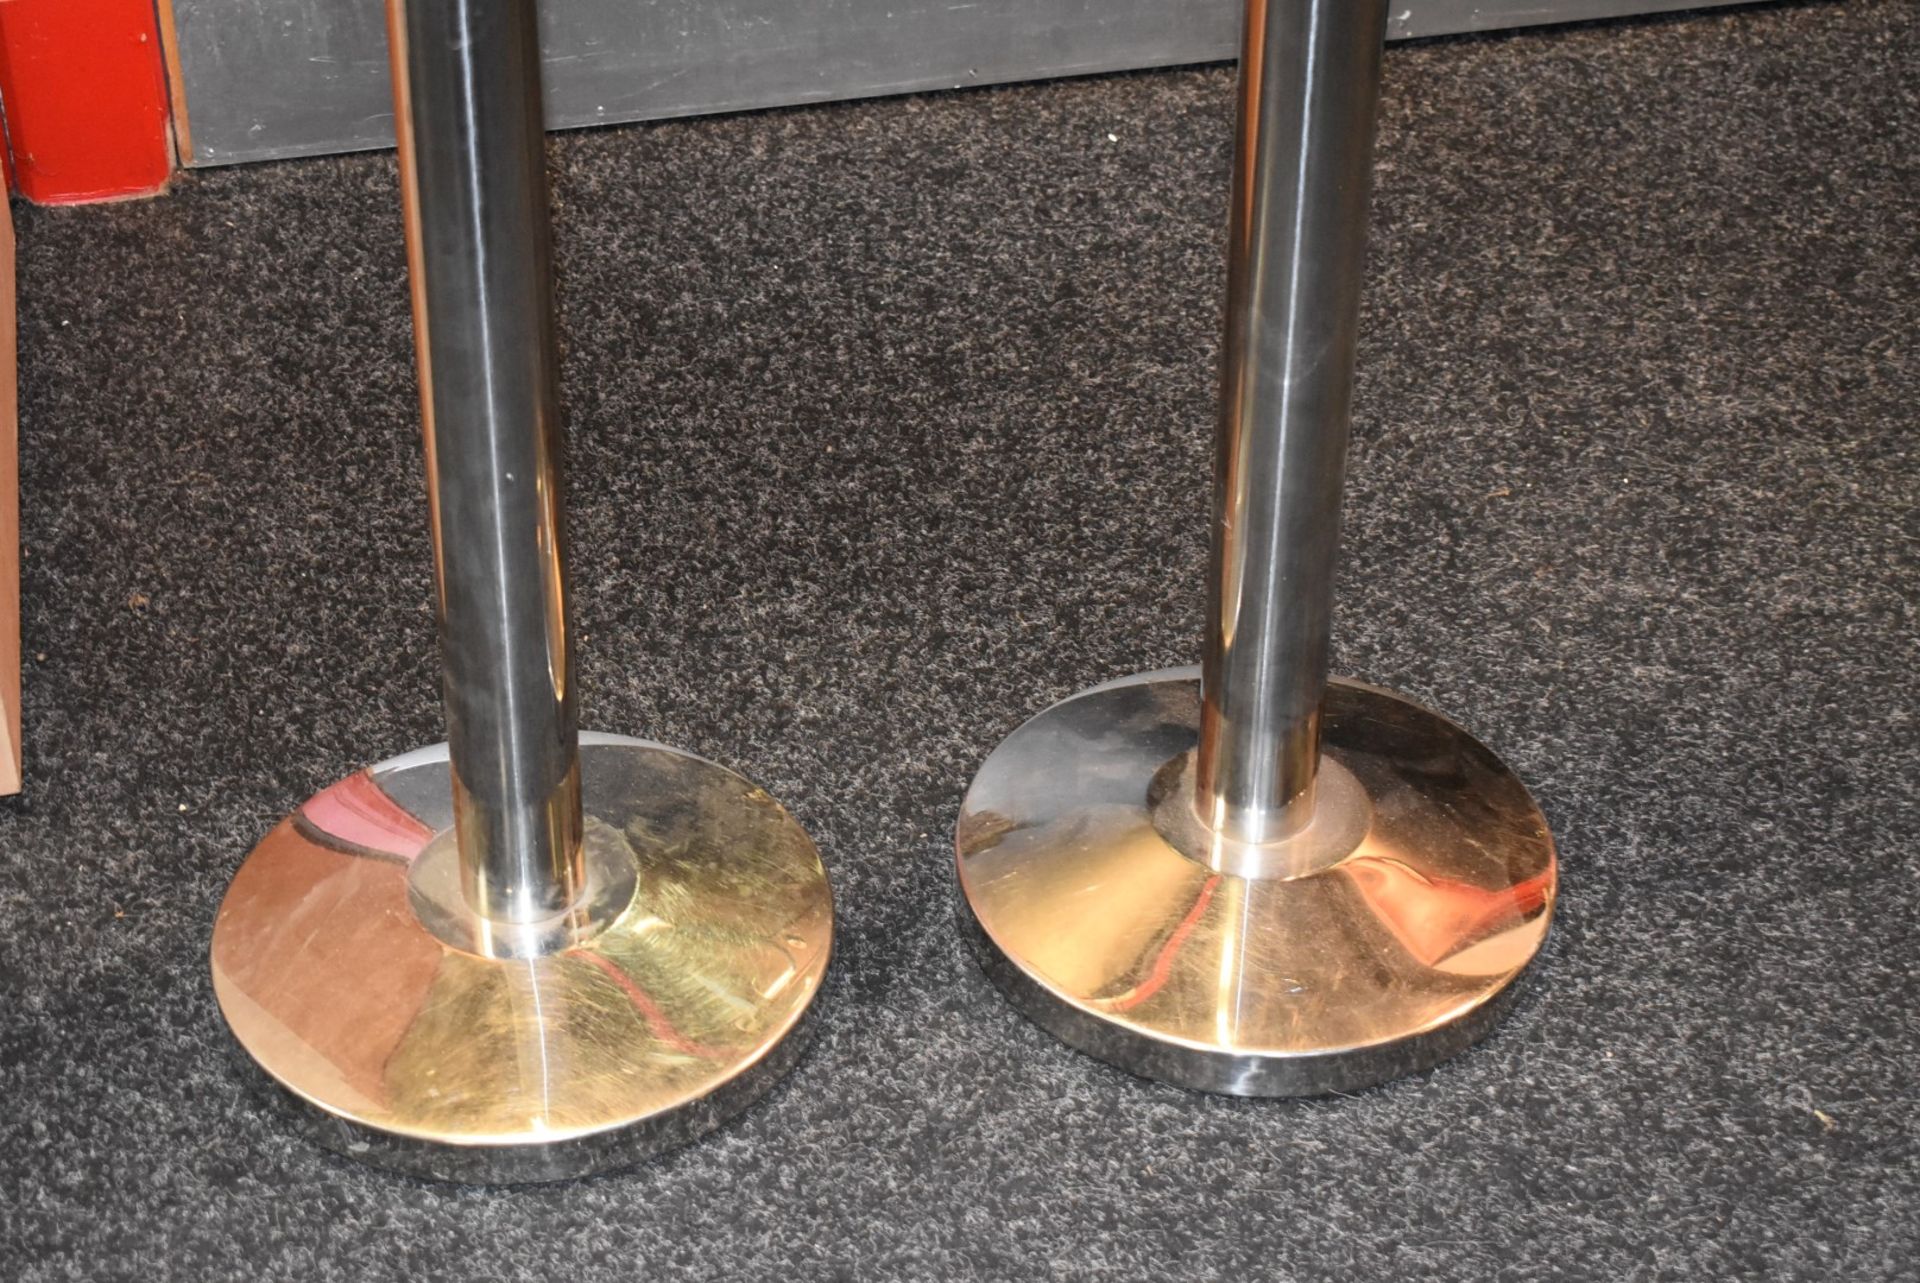 2 x Crowd Control Queue Barriers With Rectractable Belts - Chrome Finish - Approx Height 95 cms - - Image 2 of 3